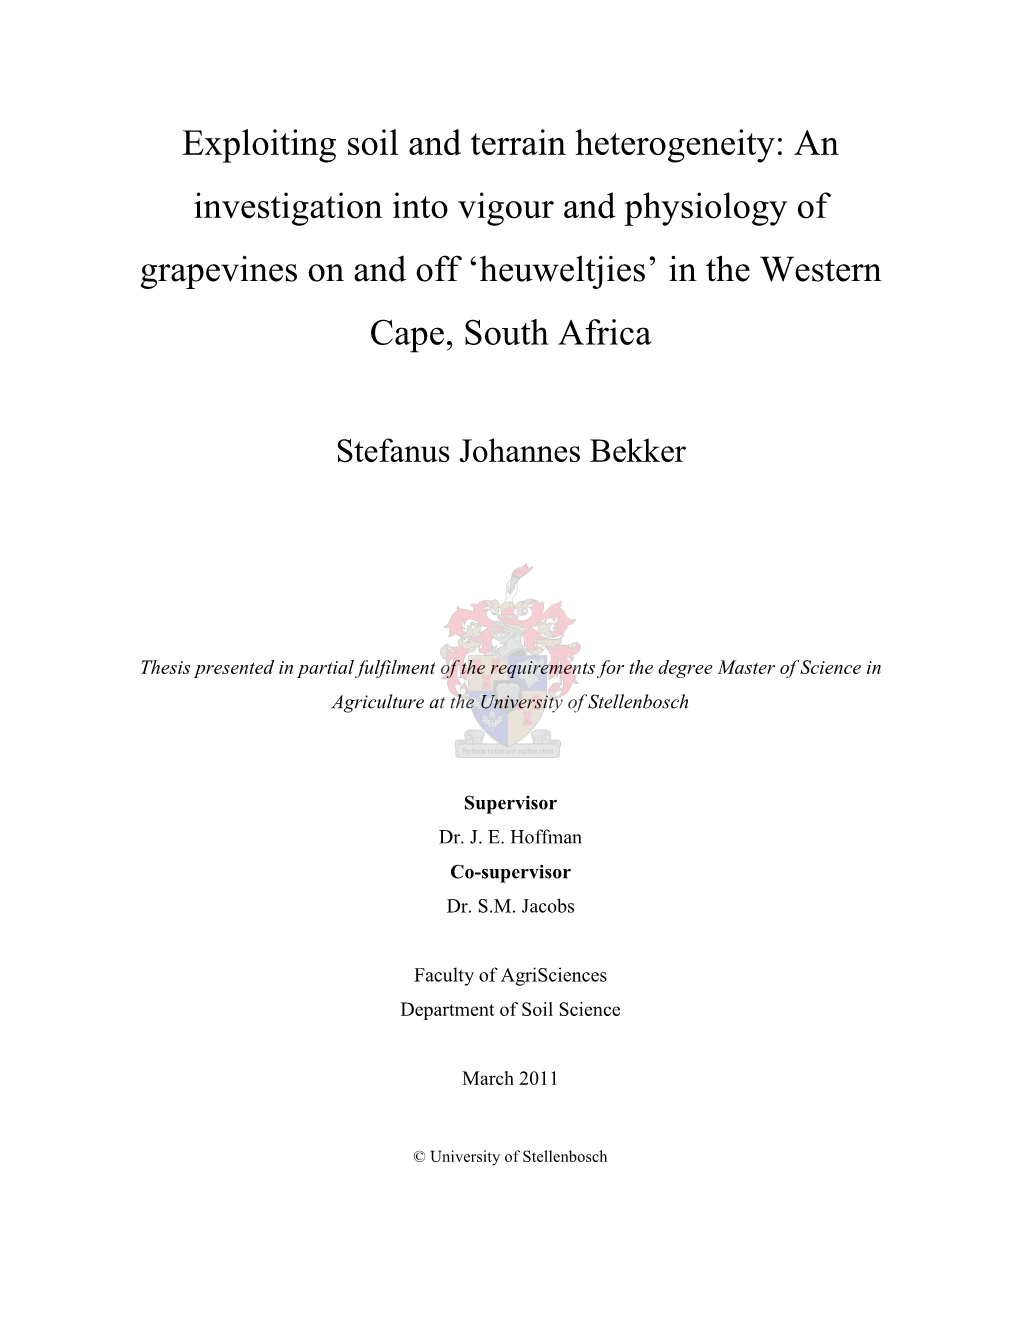 Exploiting Soil and Terrain Heterogeneity: an Investigation Into Vigour and Physiology of Grapevines on and Off „Heuweltjies‟ in the Western Cape, South Africa